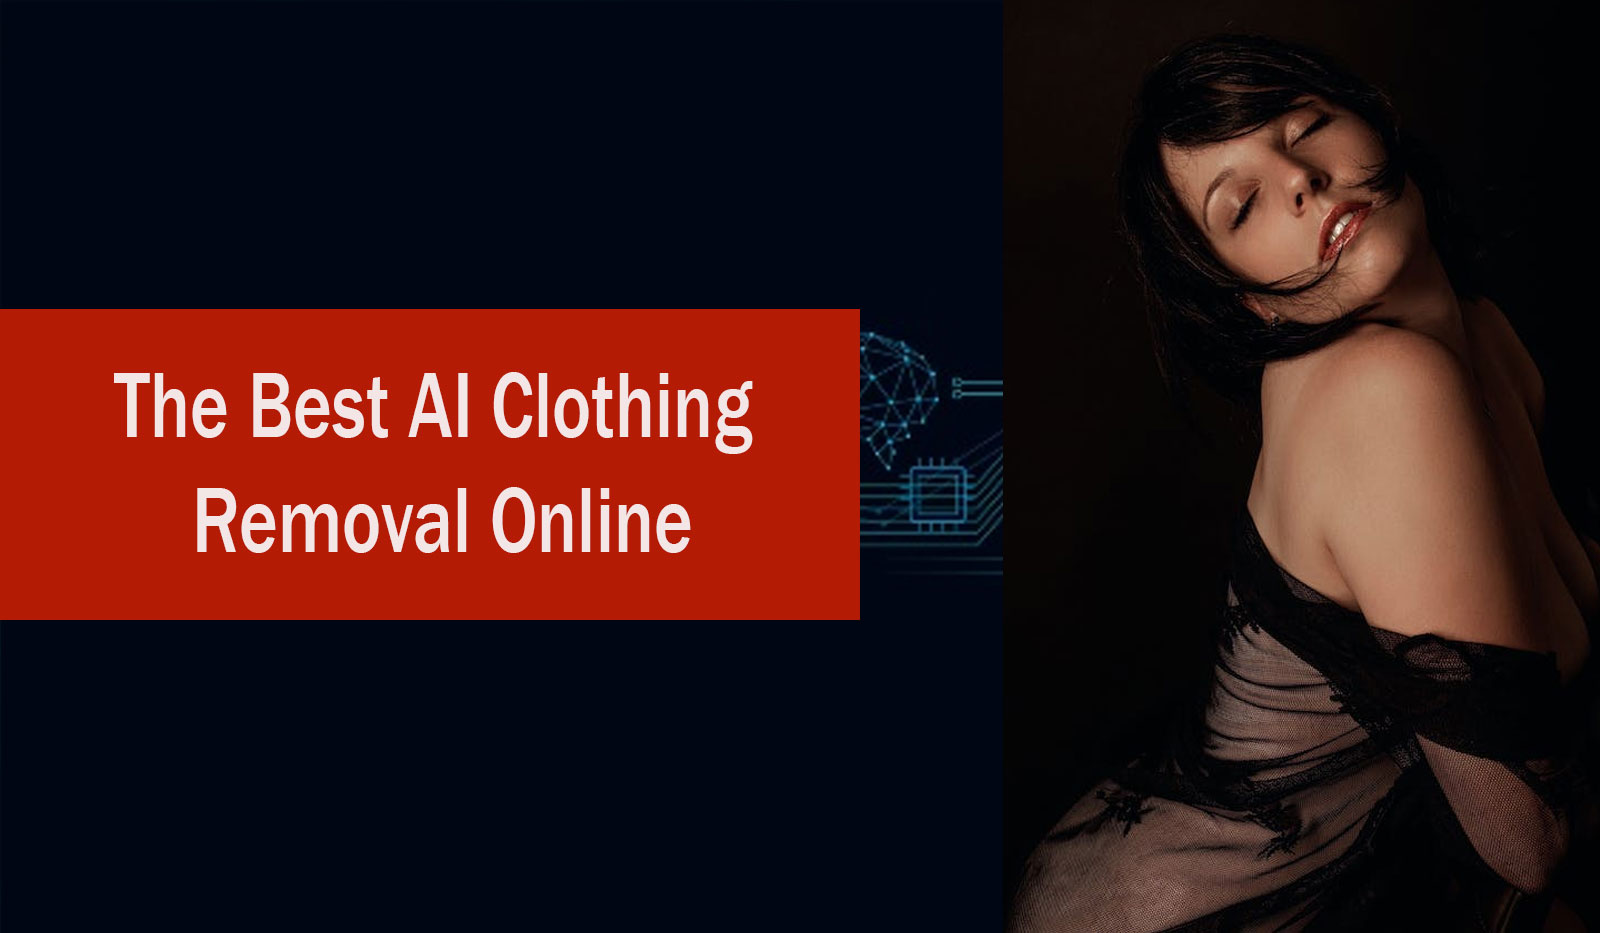 The Best AI Clothing Removal Online